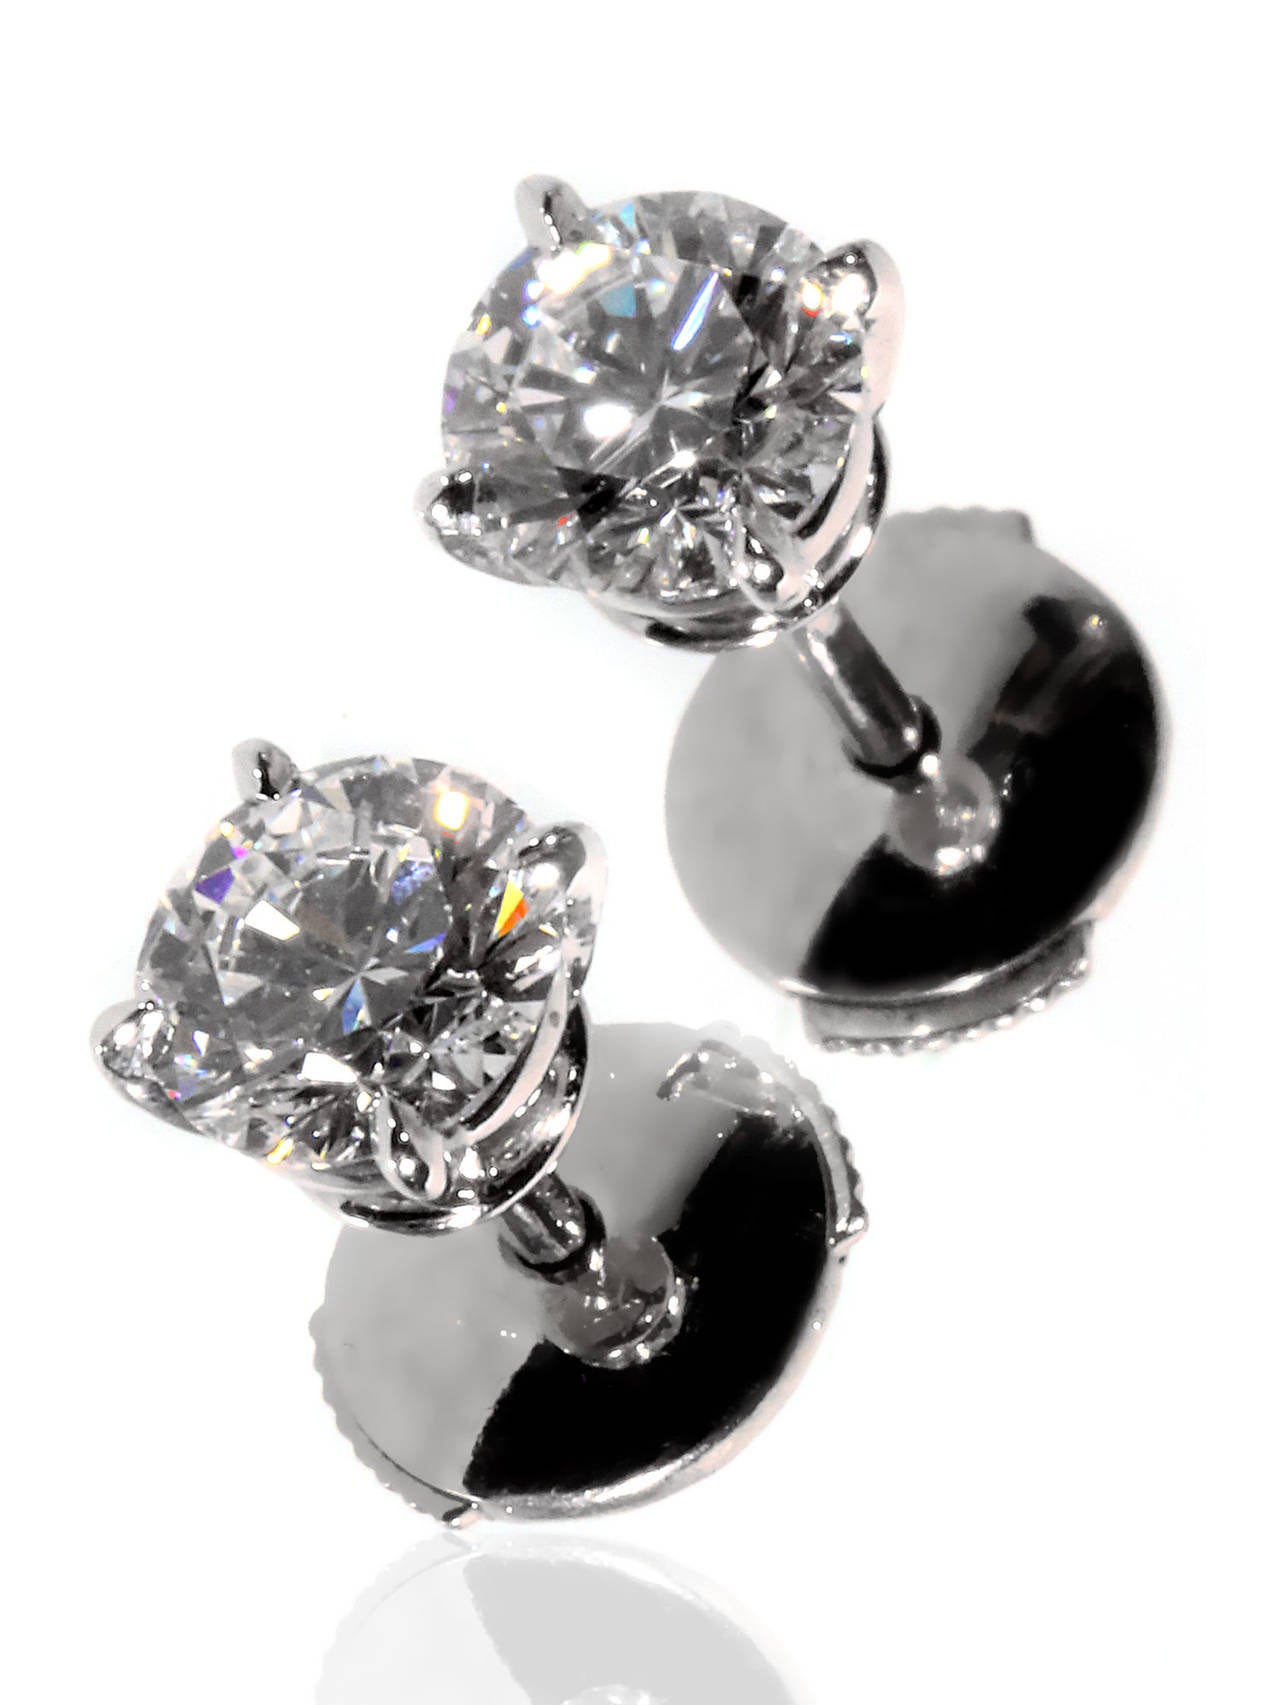 The perfect diamond studs for everyday wear or a special evening, boasting (1) .72 Vs1 E Color round brilliant cut diamond, and 1 (.71) Vs2 E Color round brilliant cut diamond. These spectacular studs are crafted in platinum, and have a weight of